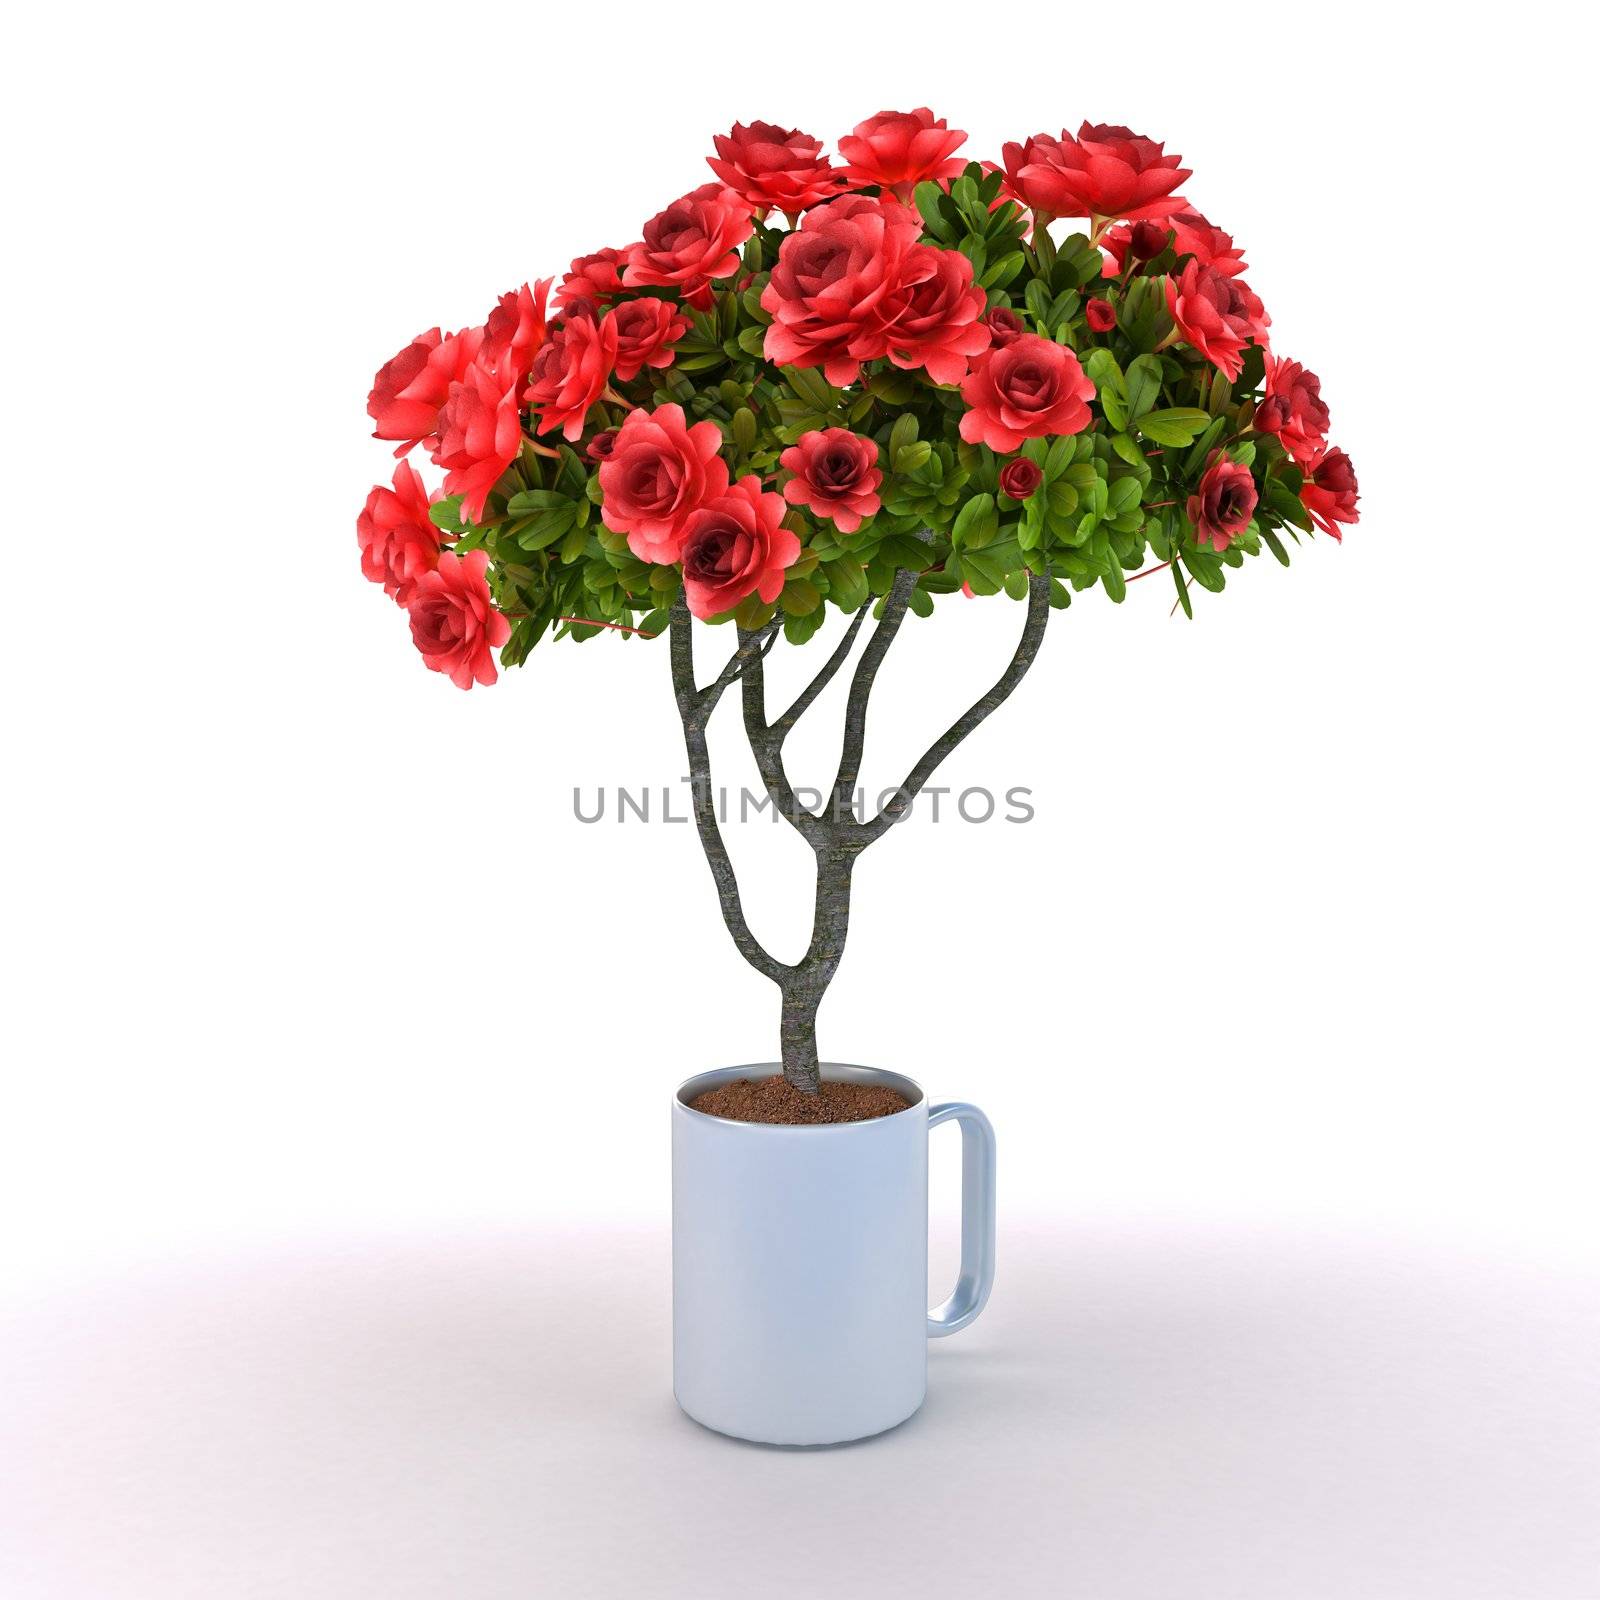 Rosebush grow from cup on white background